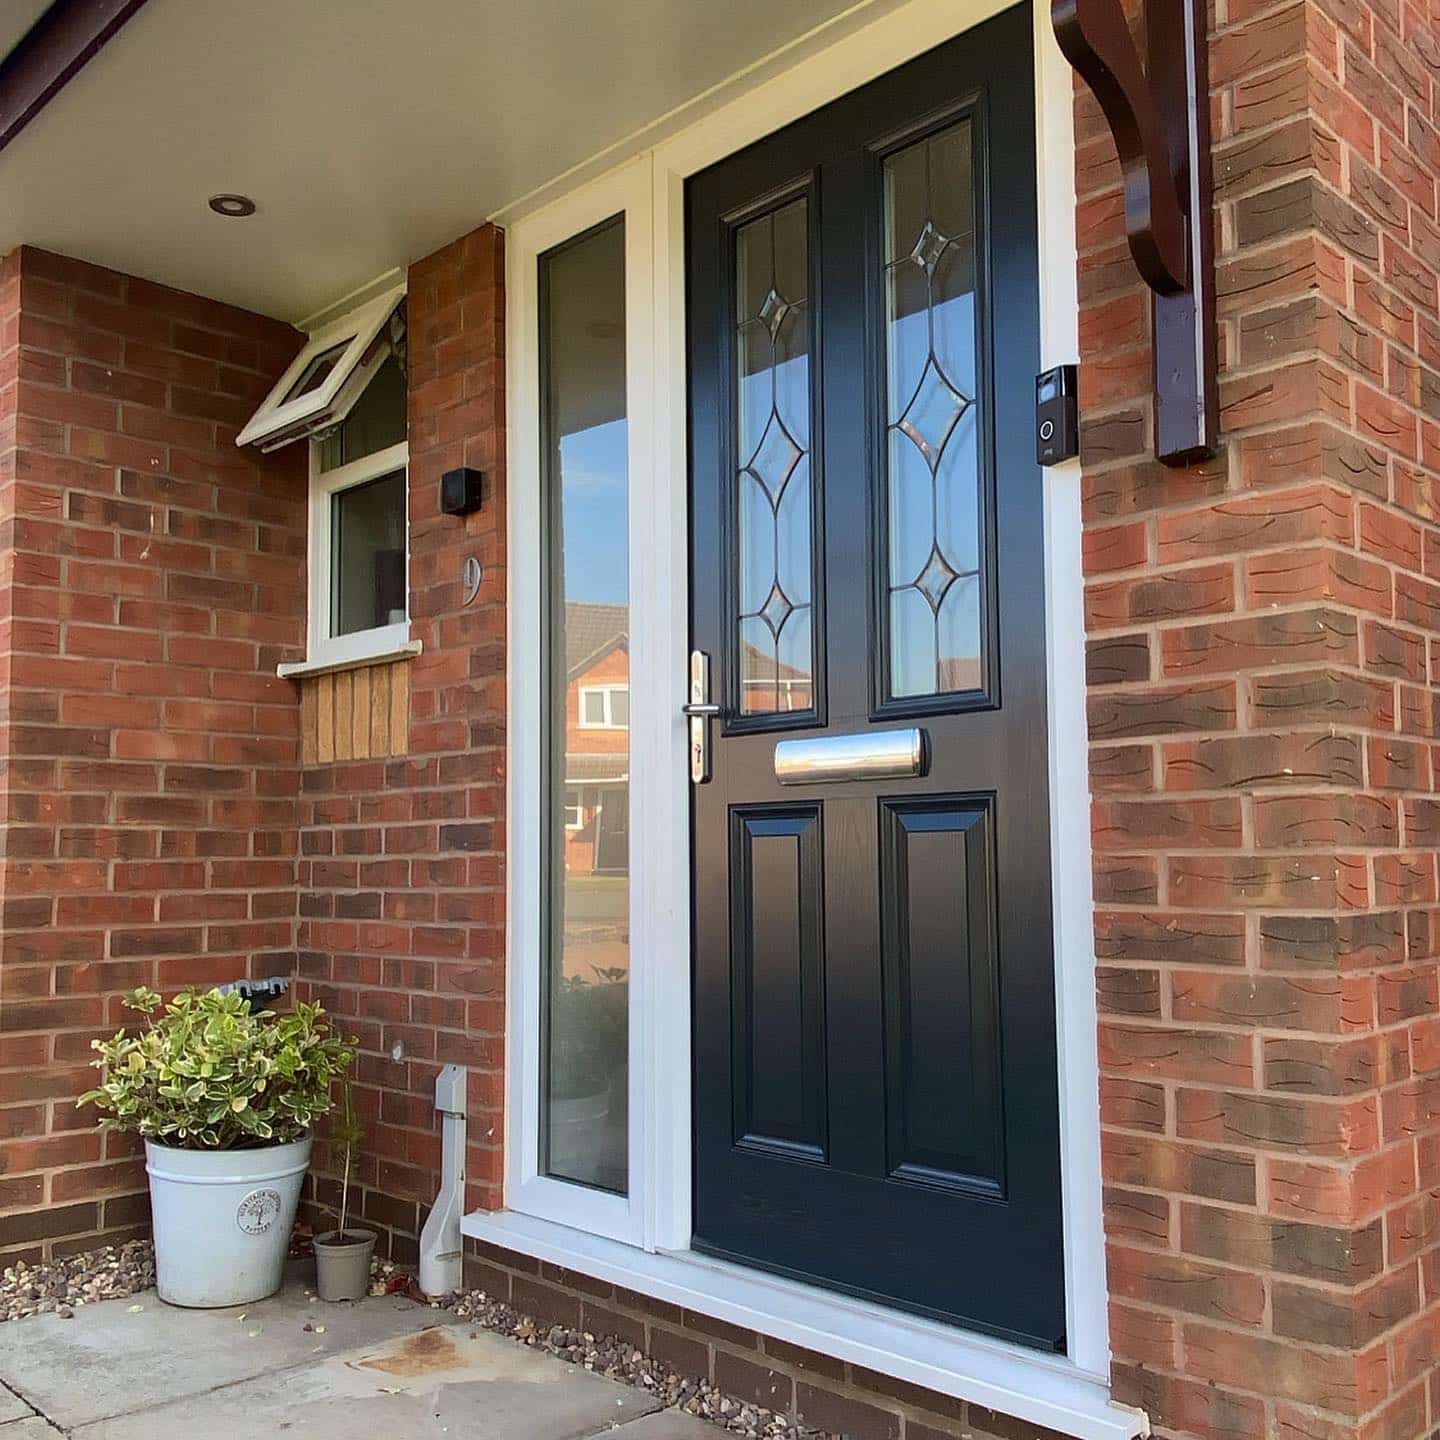 This run down door was totally transformed by the Sprayworks UK team....